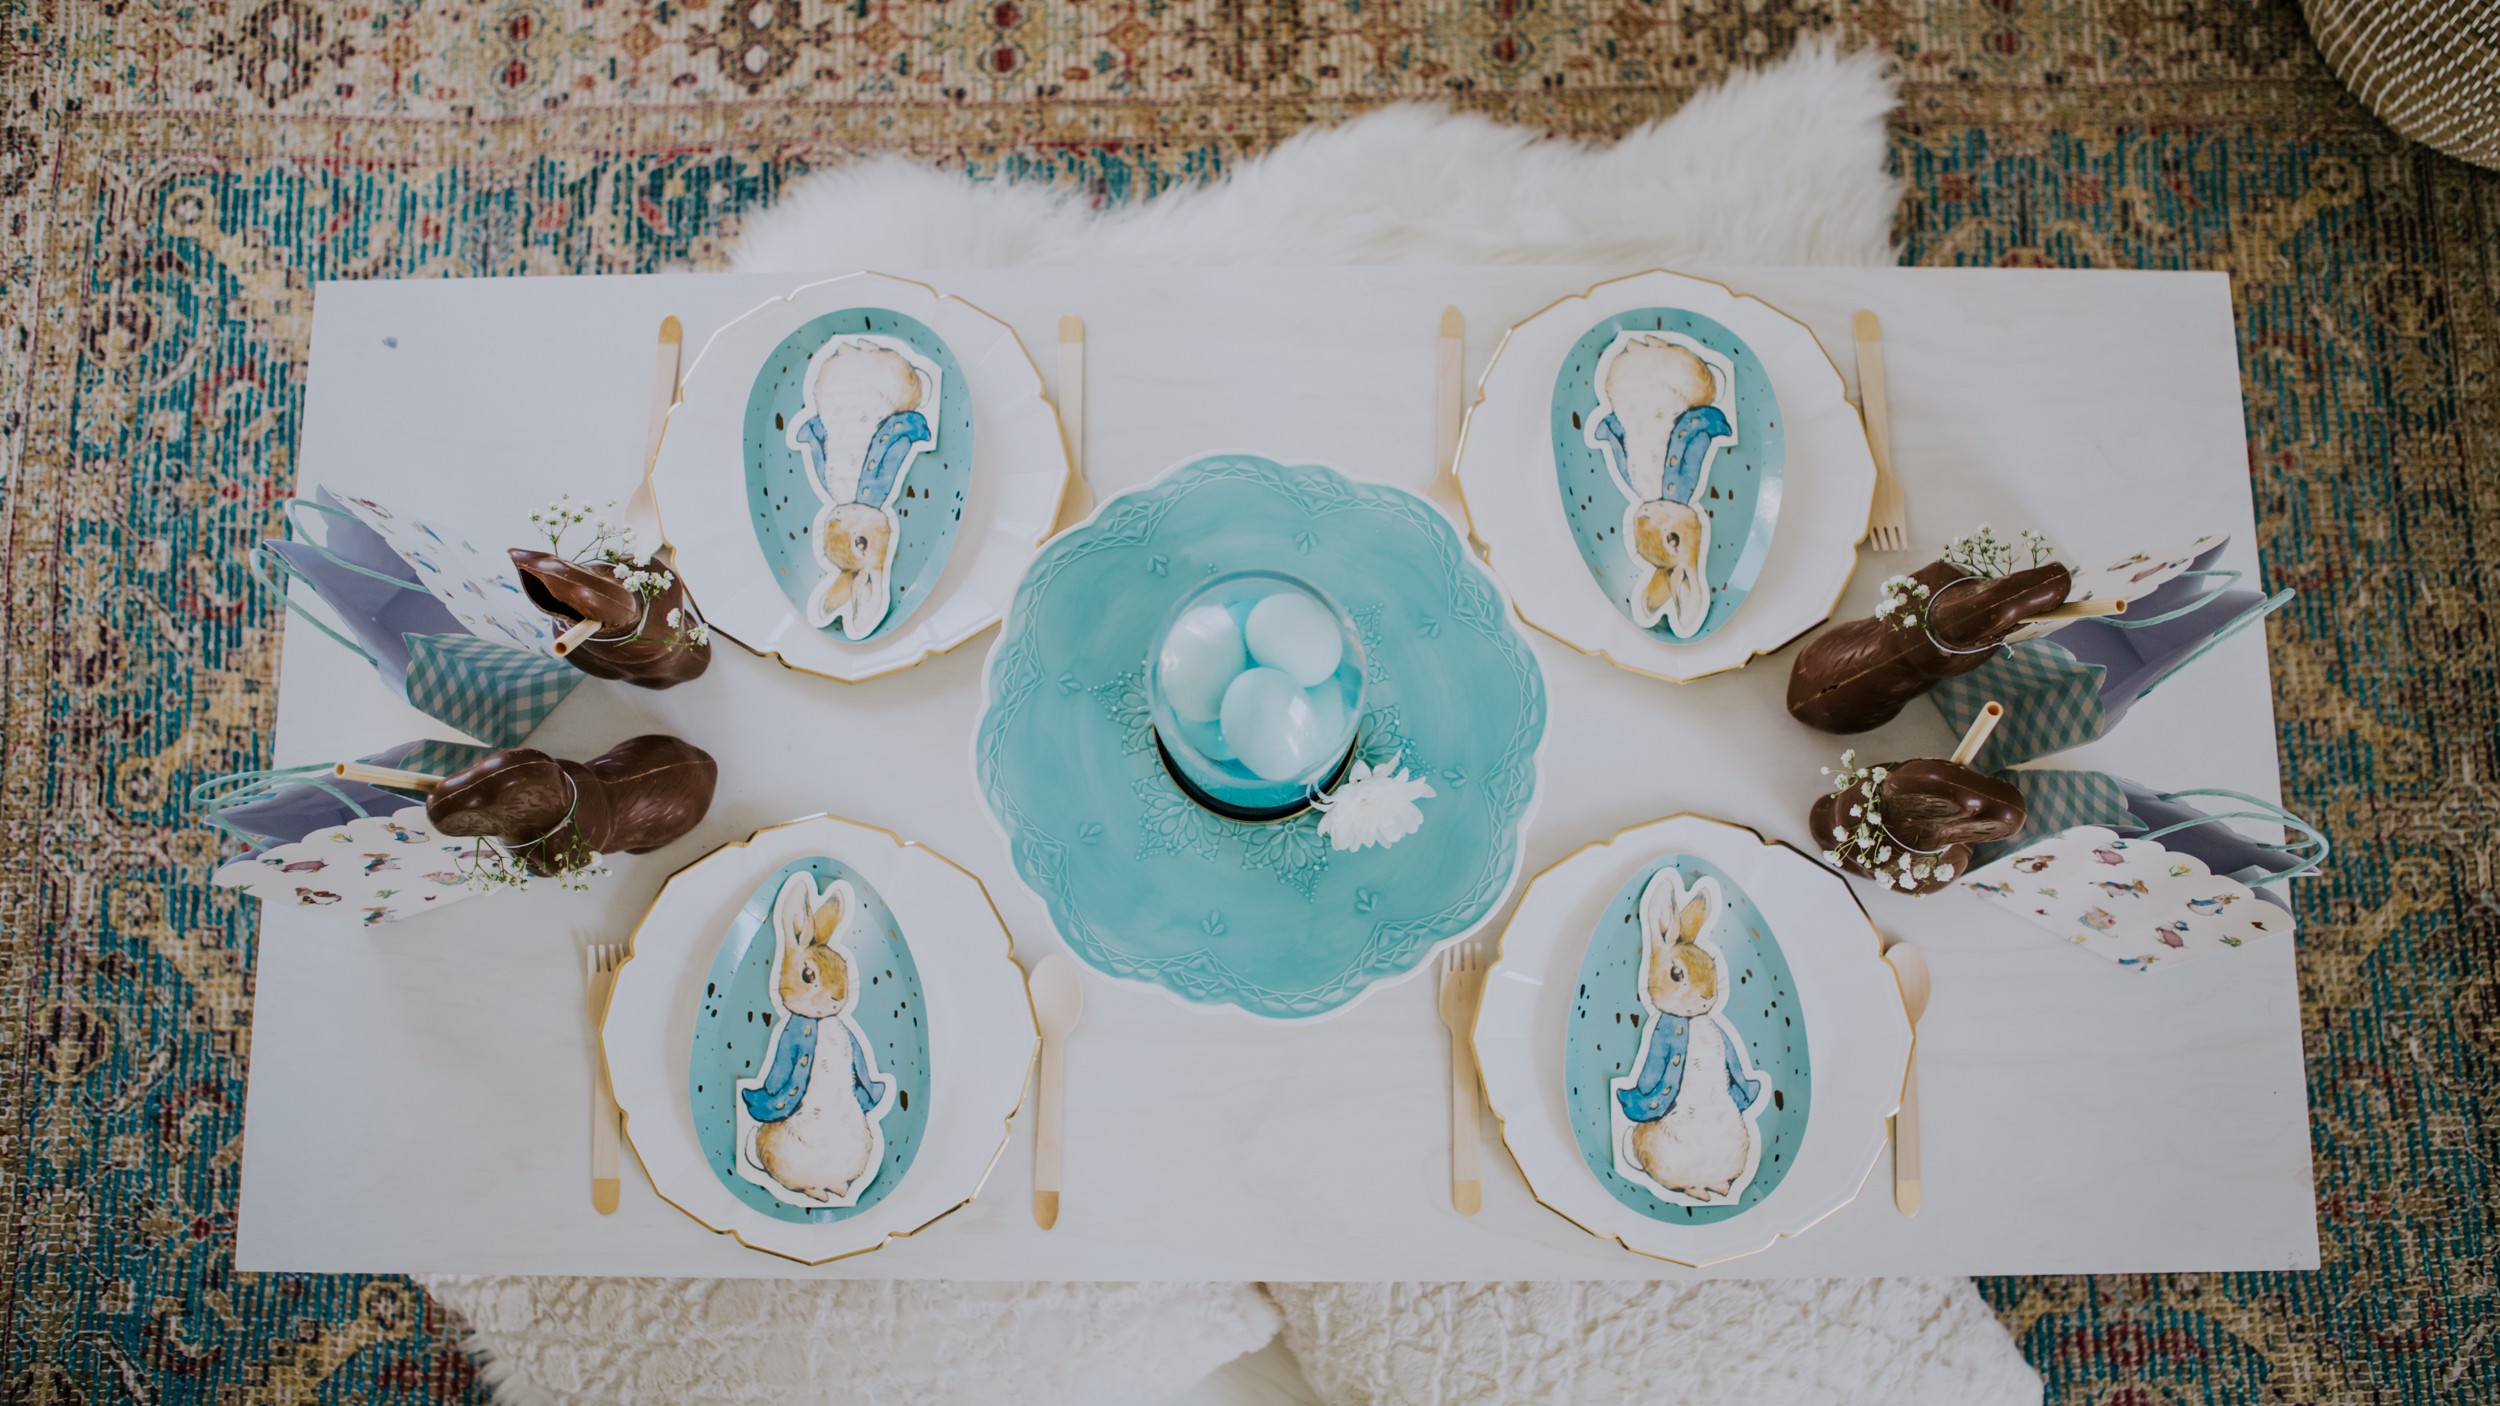 4 place settings at a white table with Peter Rabbit napkins, blue easter egg plates and blue eggs in the centre of the table